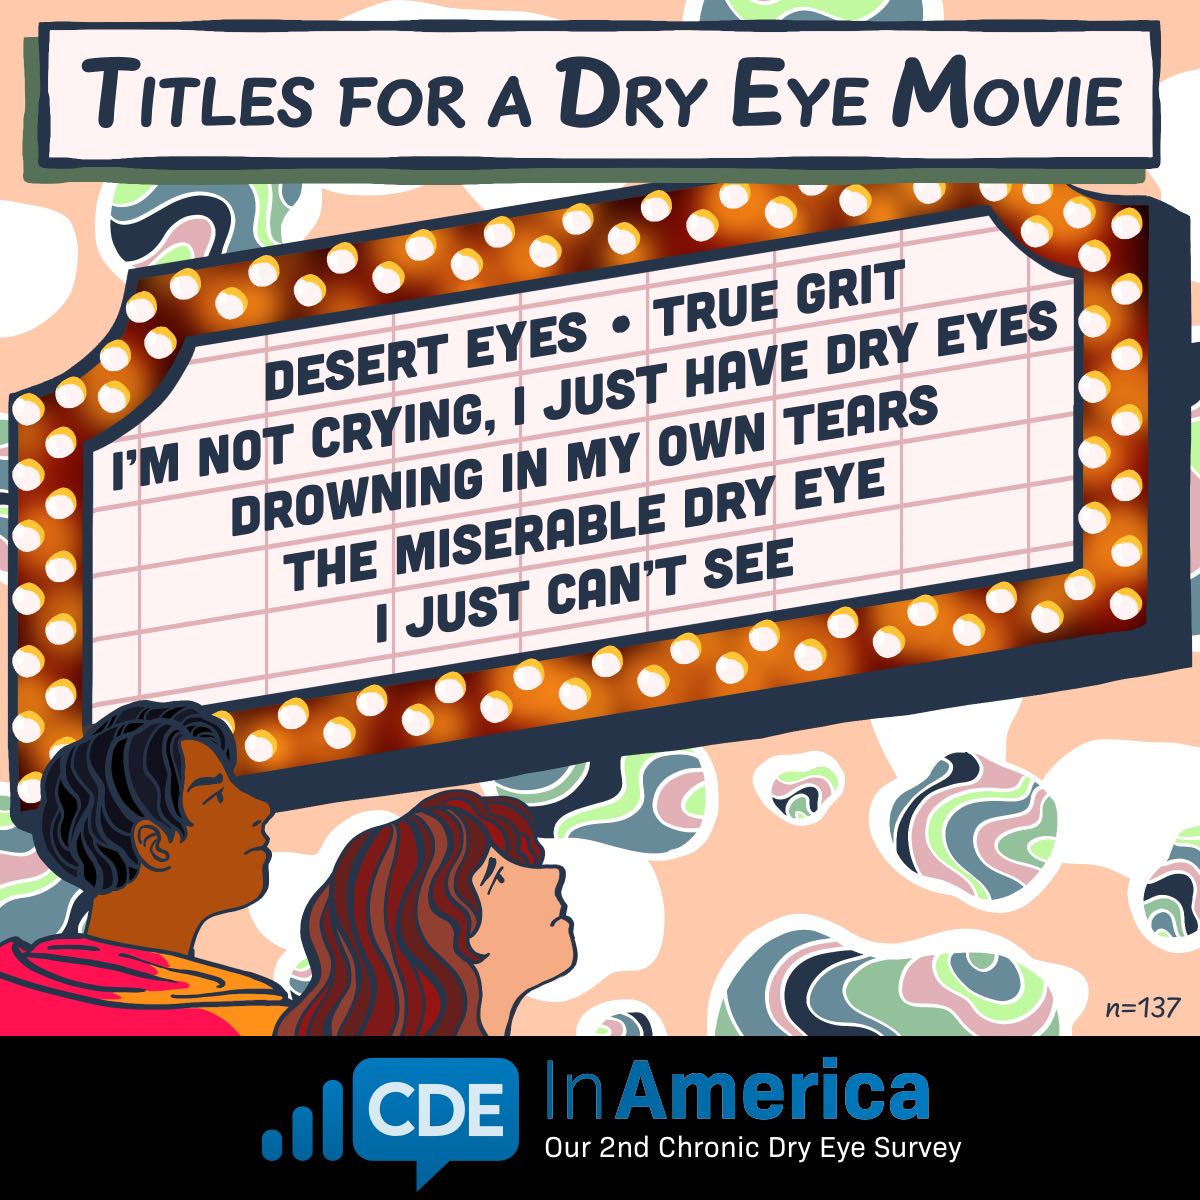 titles for a movie about chronic dry eye include True Grit and Desert Eyes